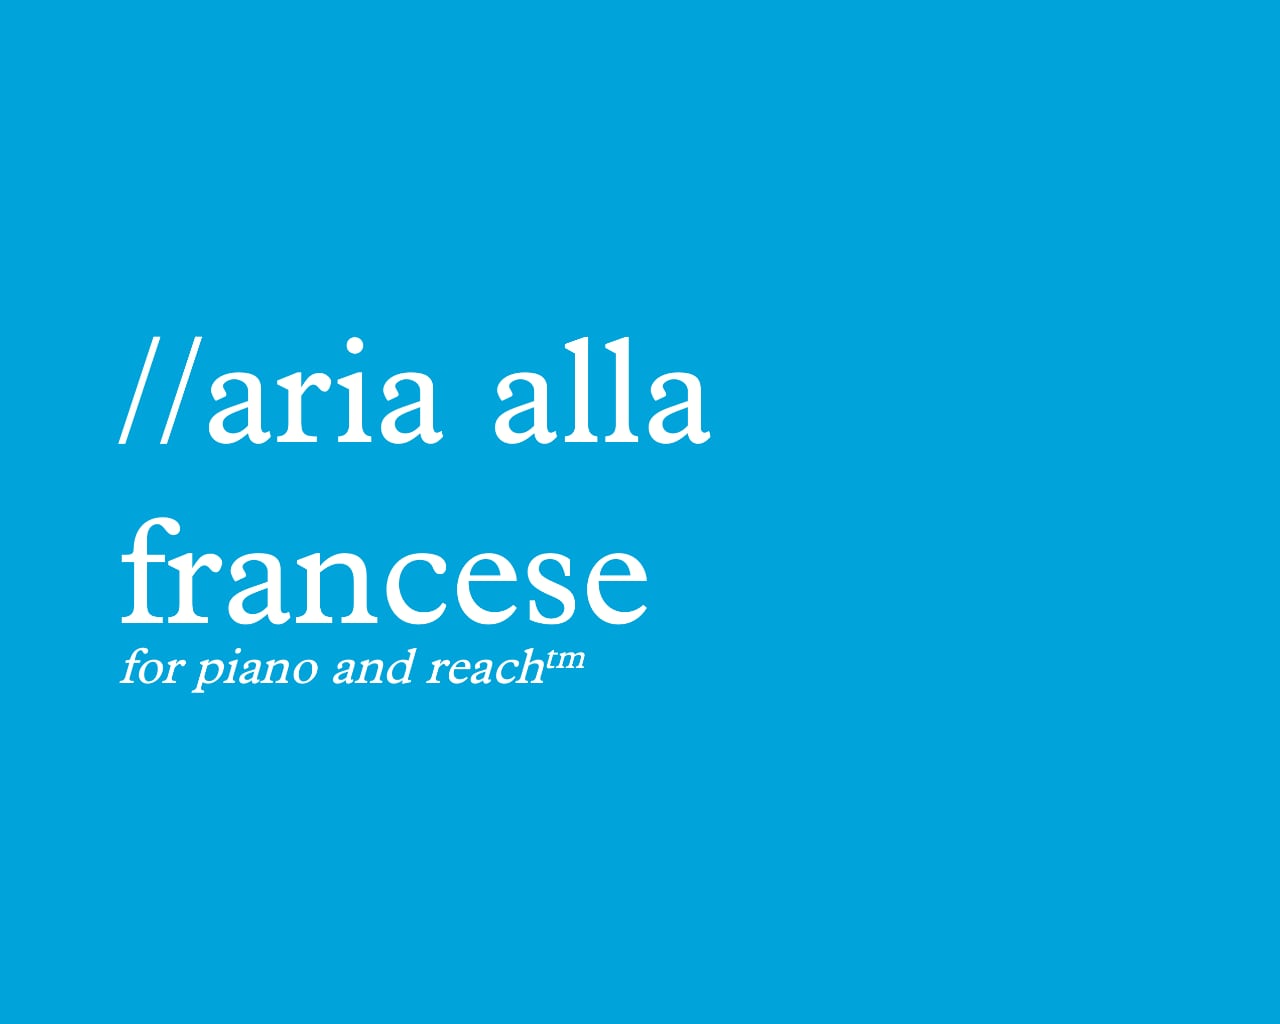 Cover image from the aria alla francese scoresheet cover. Links to a performance of aria alla francese on YouTube.